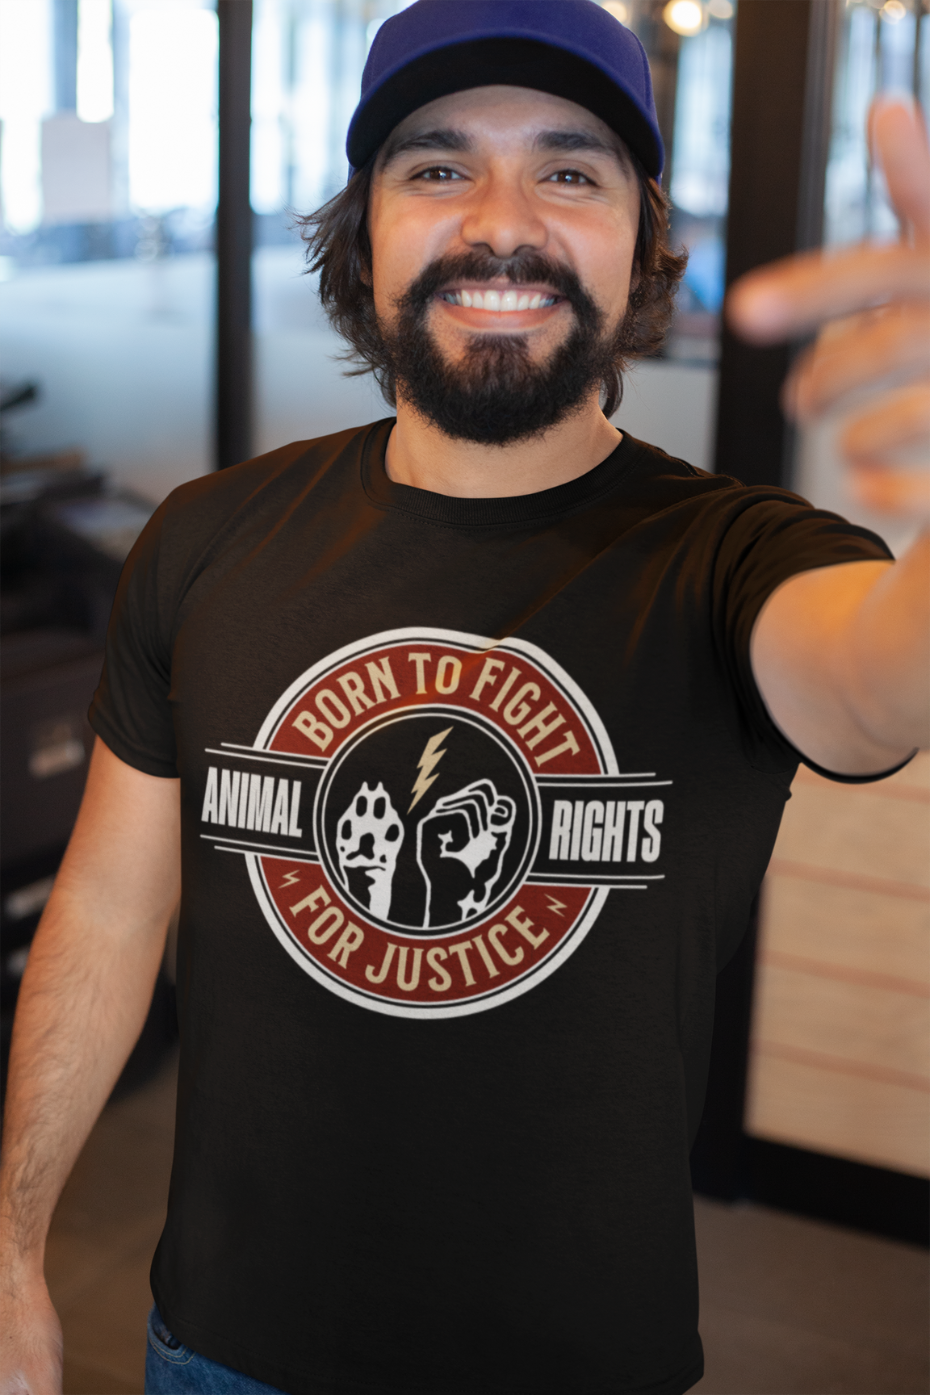 Born to Fight For Justice Unisex Basic T-Shirt